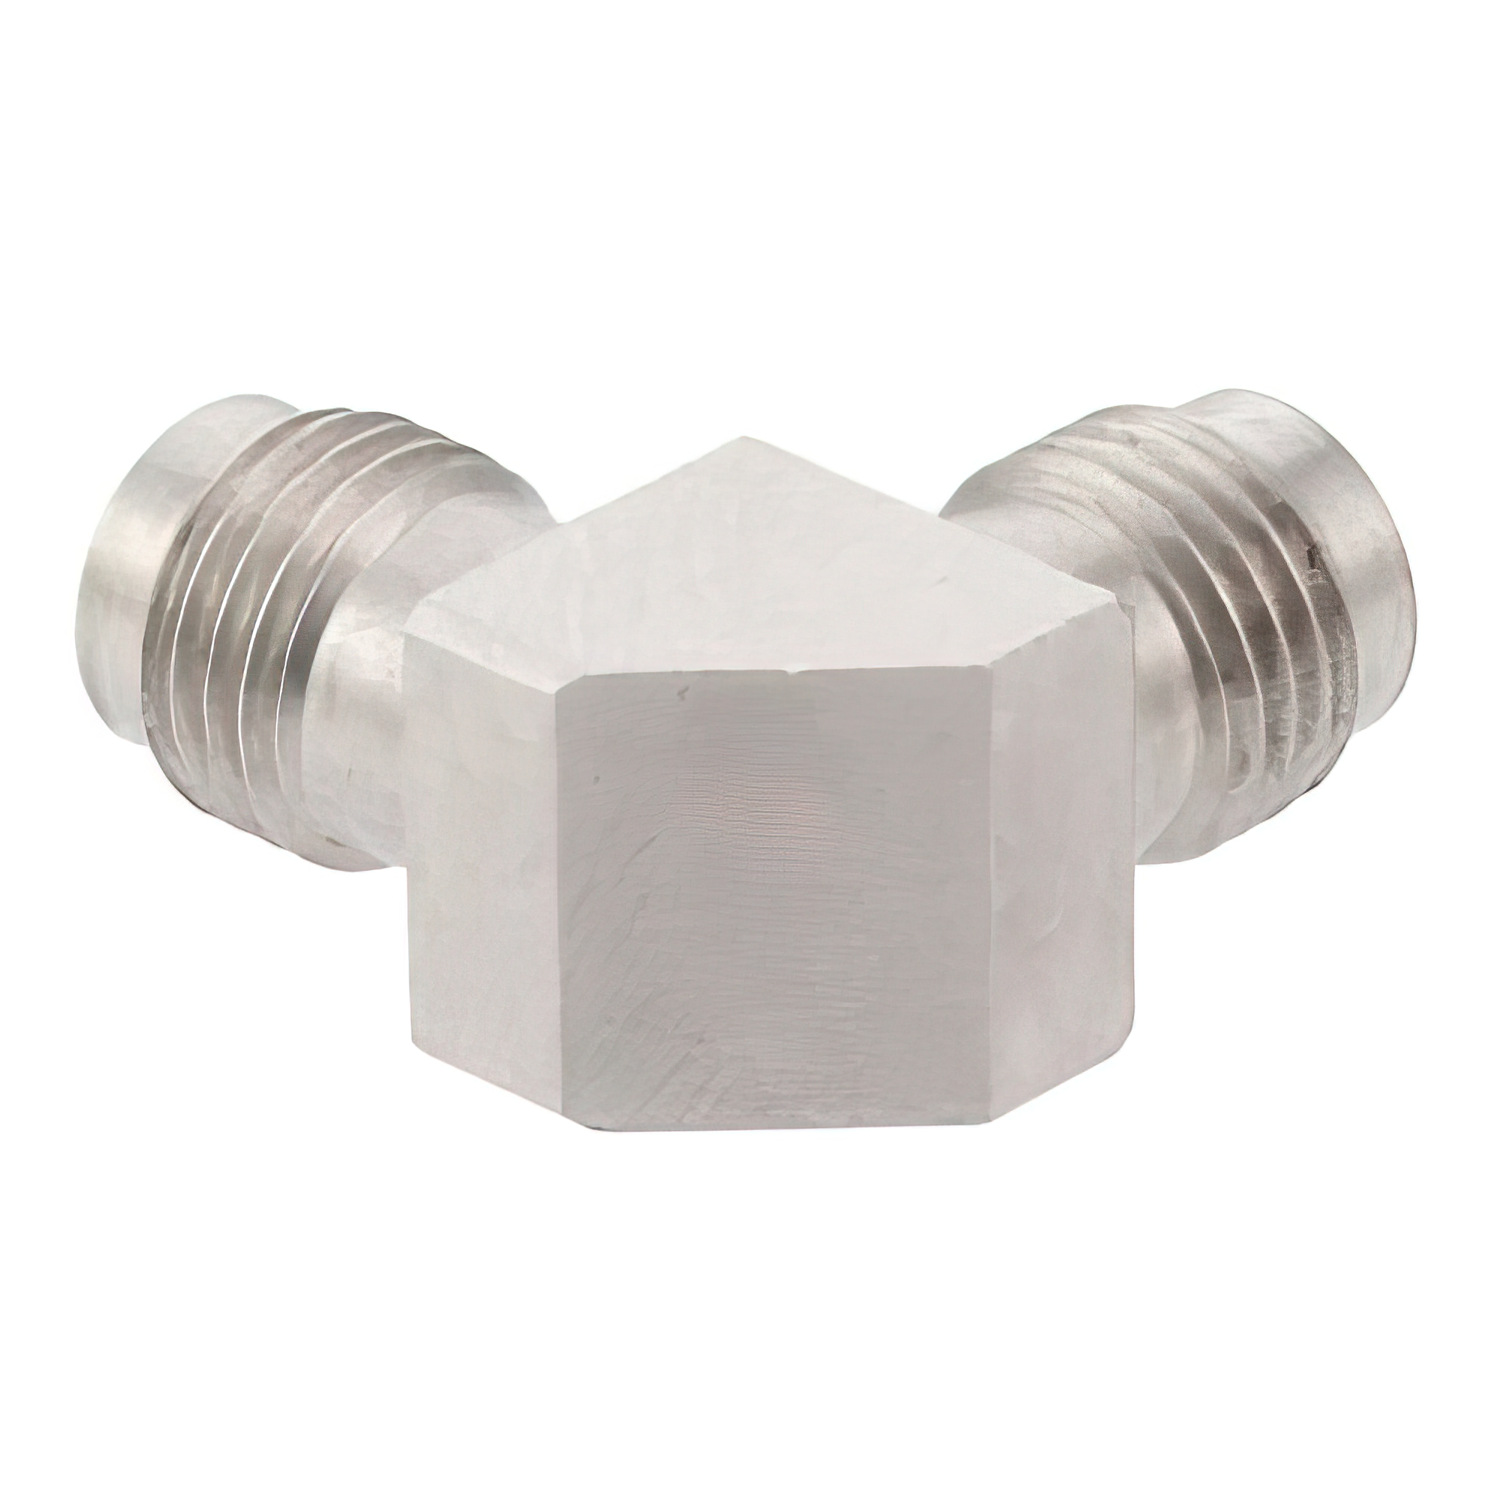 2.4mm Female to 2.4mm Female Miter Right Angle Adapter4